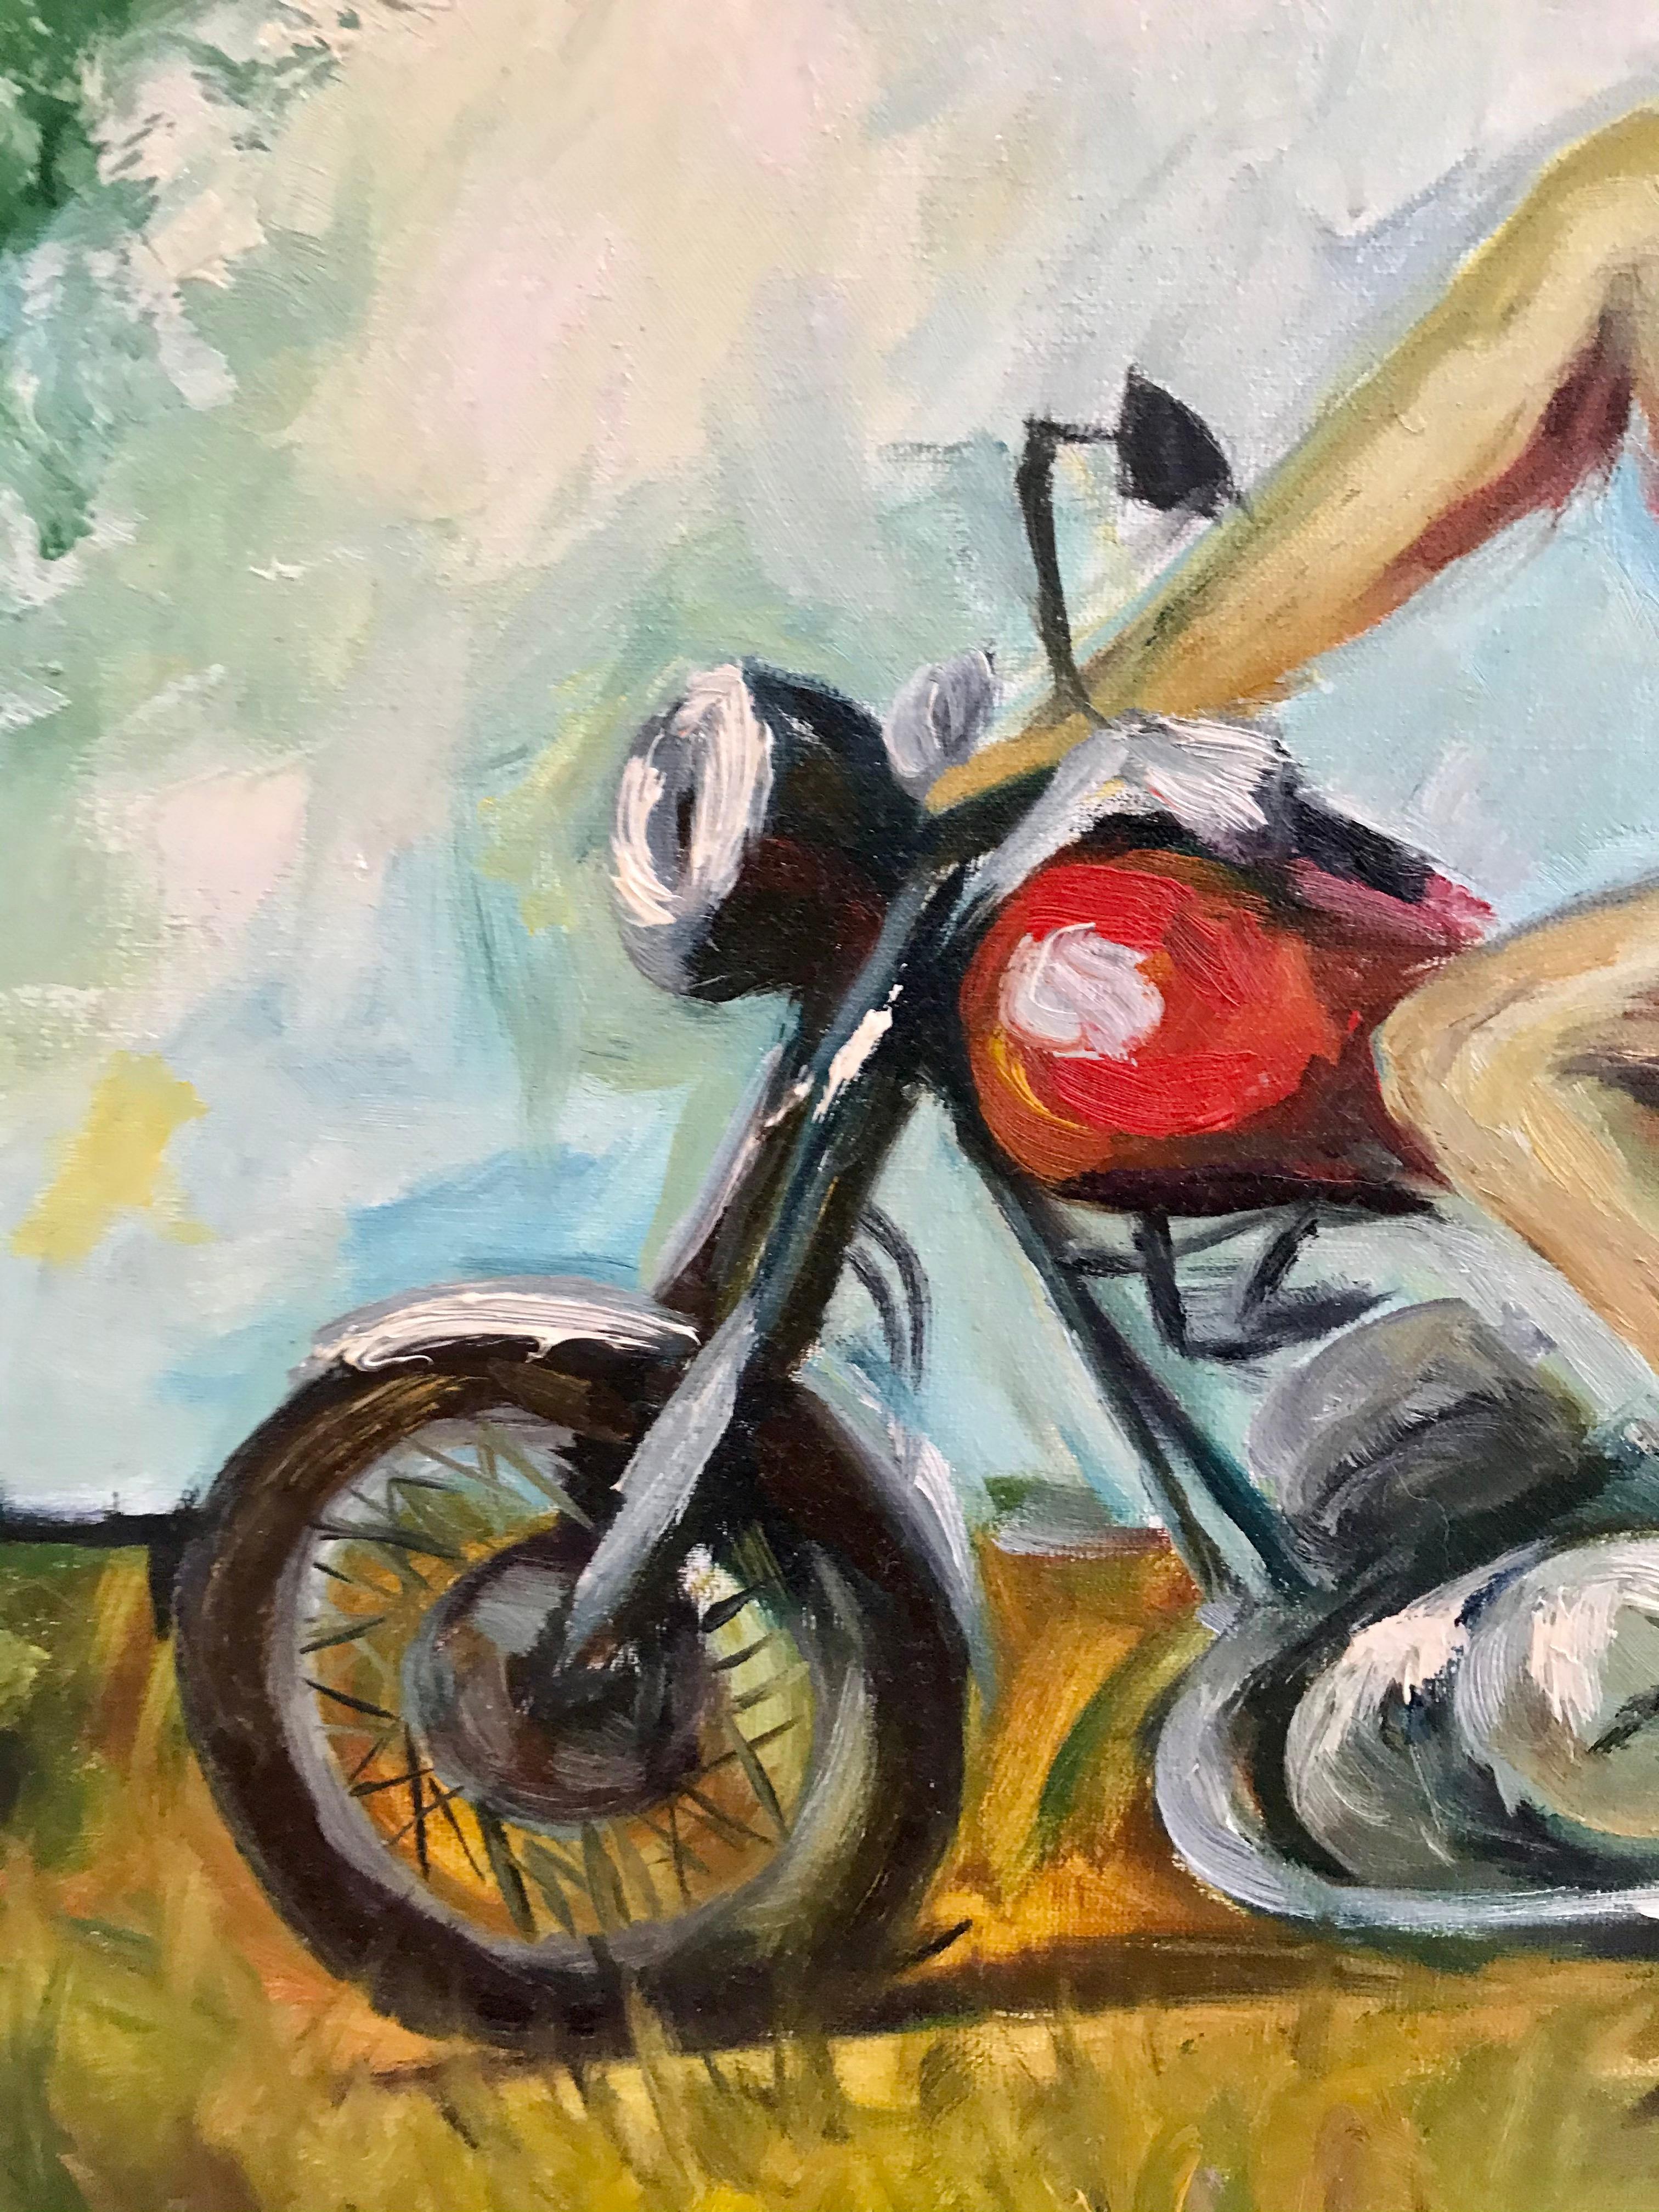 Girl on a motorcycle - Impressionist Painting by  Kateryna Krivchach